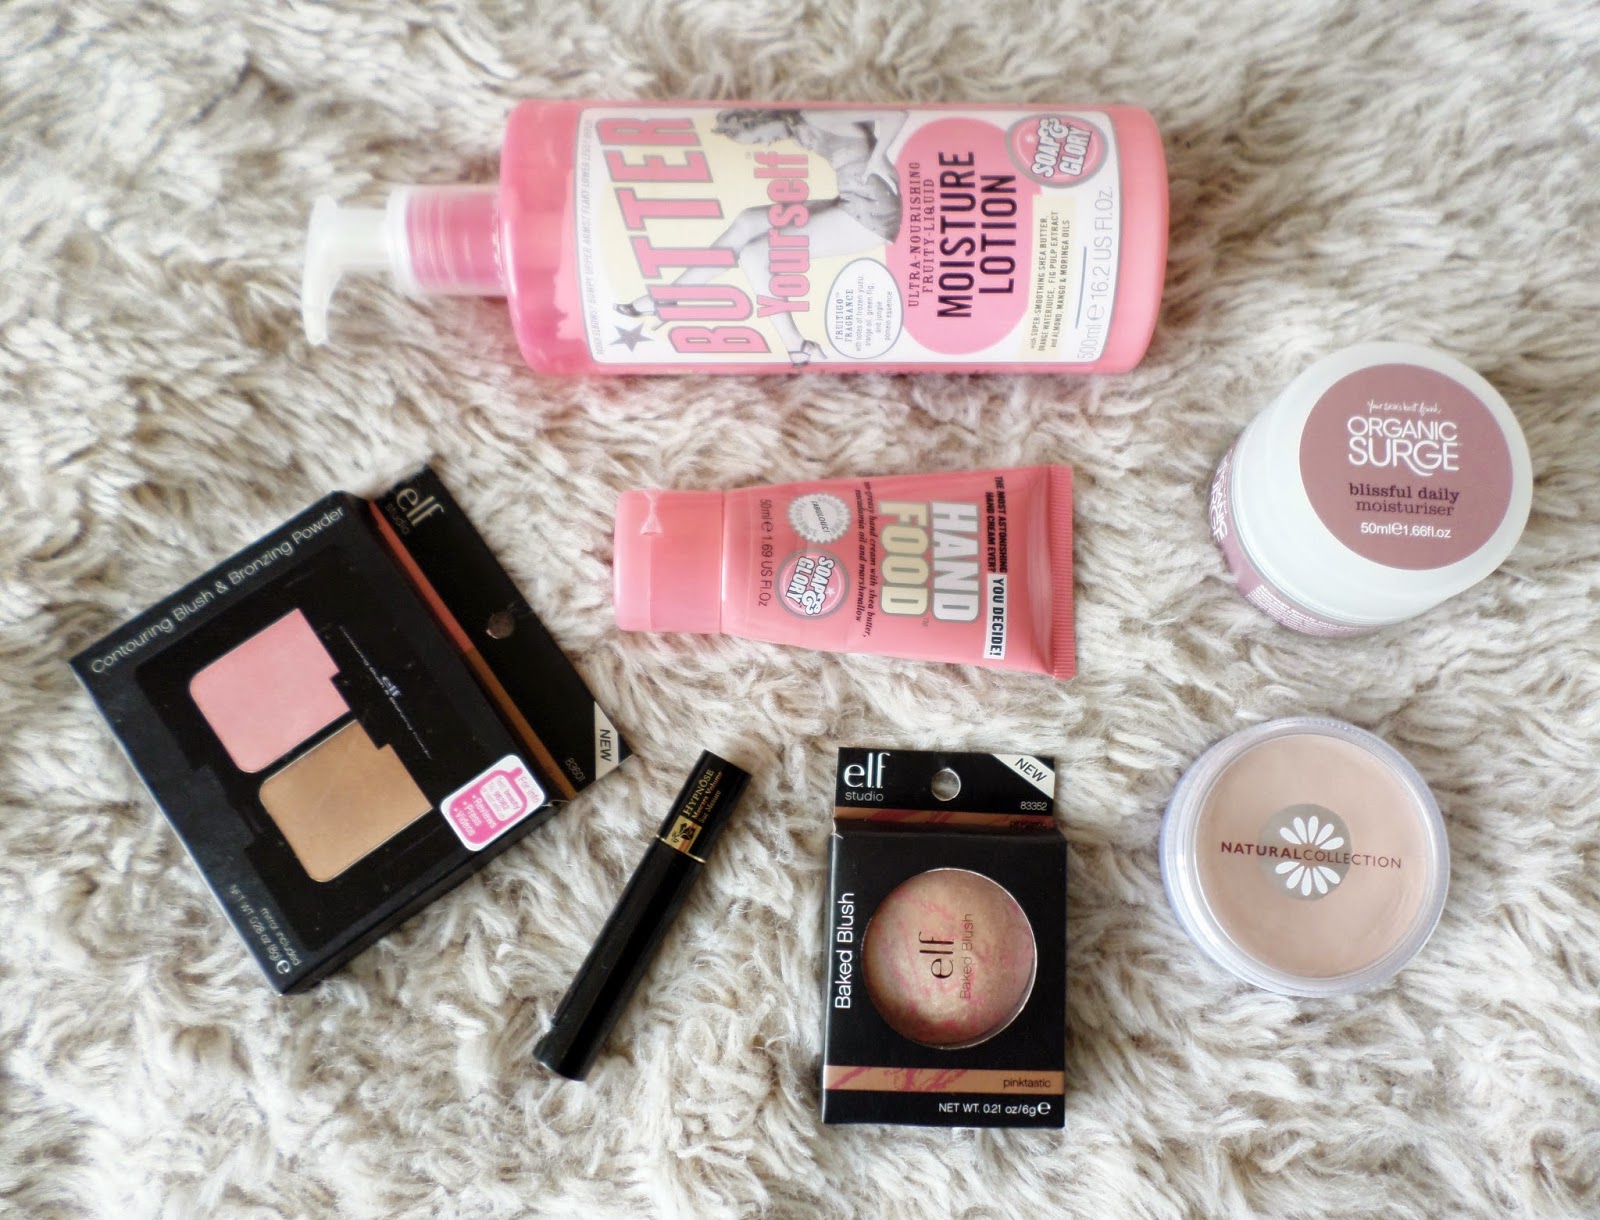 August Beauty Favourites Featuring Soap & Glory, Organic Surge, Natural Collection, ELF Cosmetics and Lancome